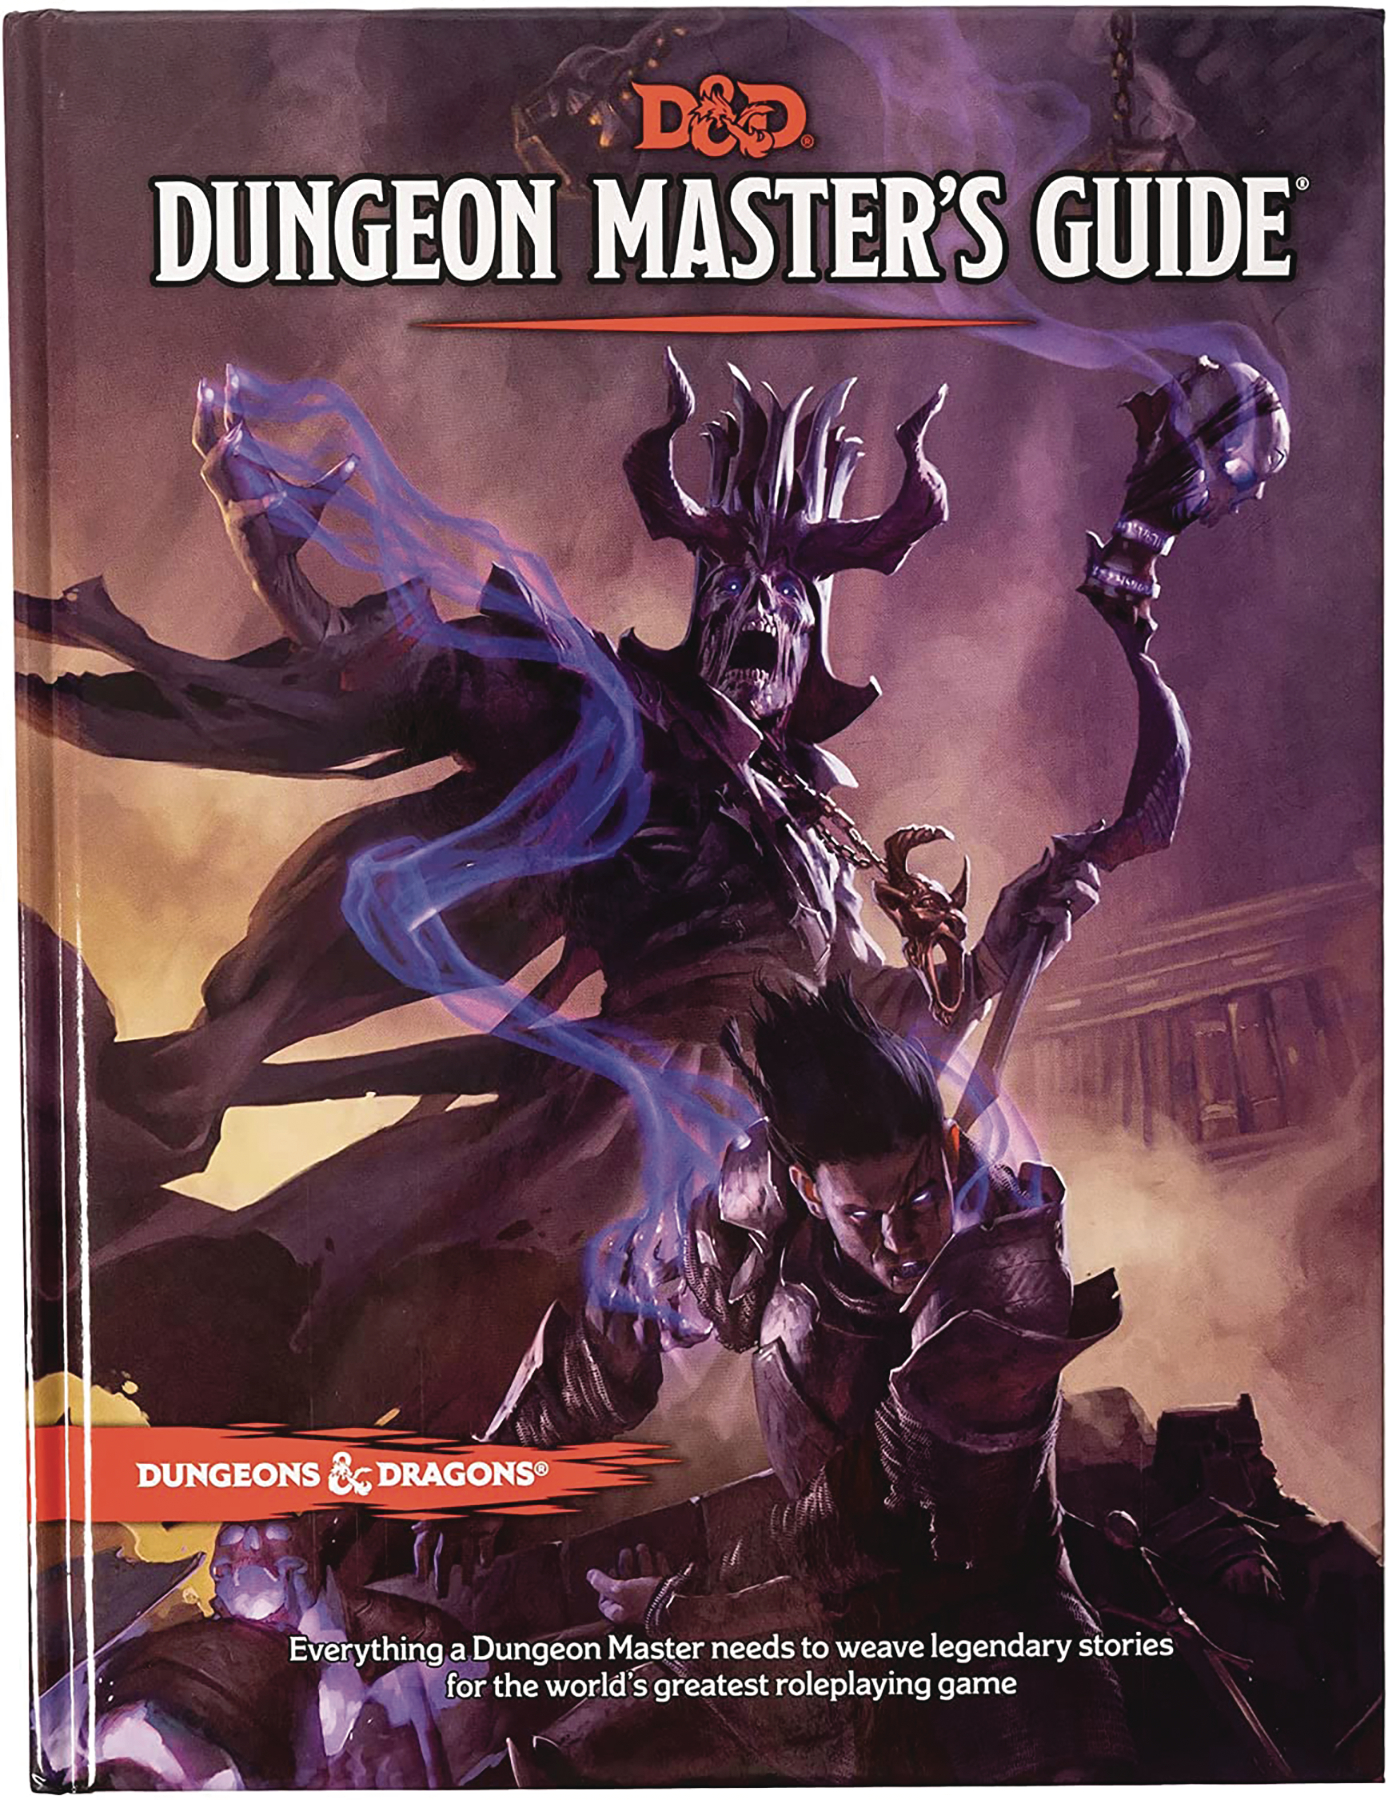 Dungeons & Dragons RPG 5e Dungeon Master's Guide Hardcover